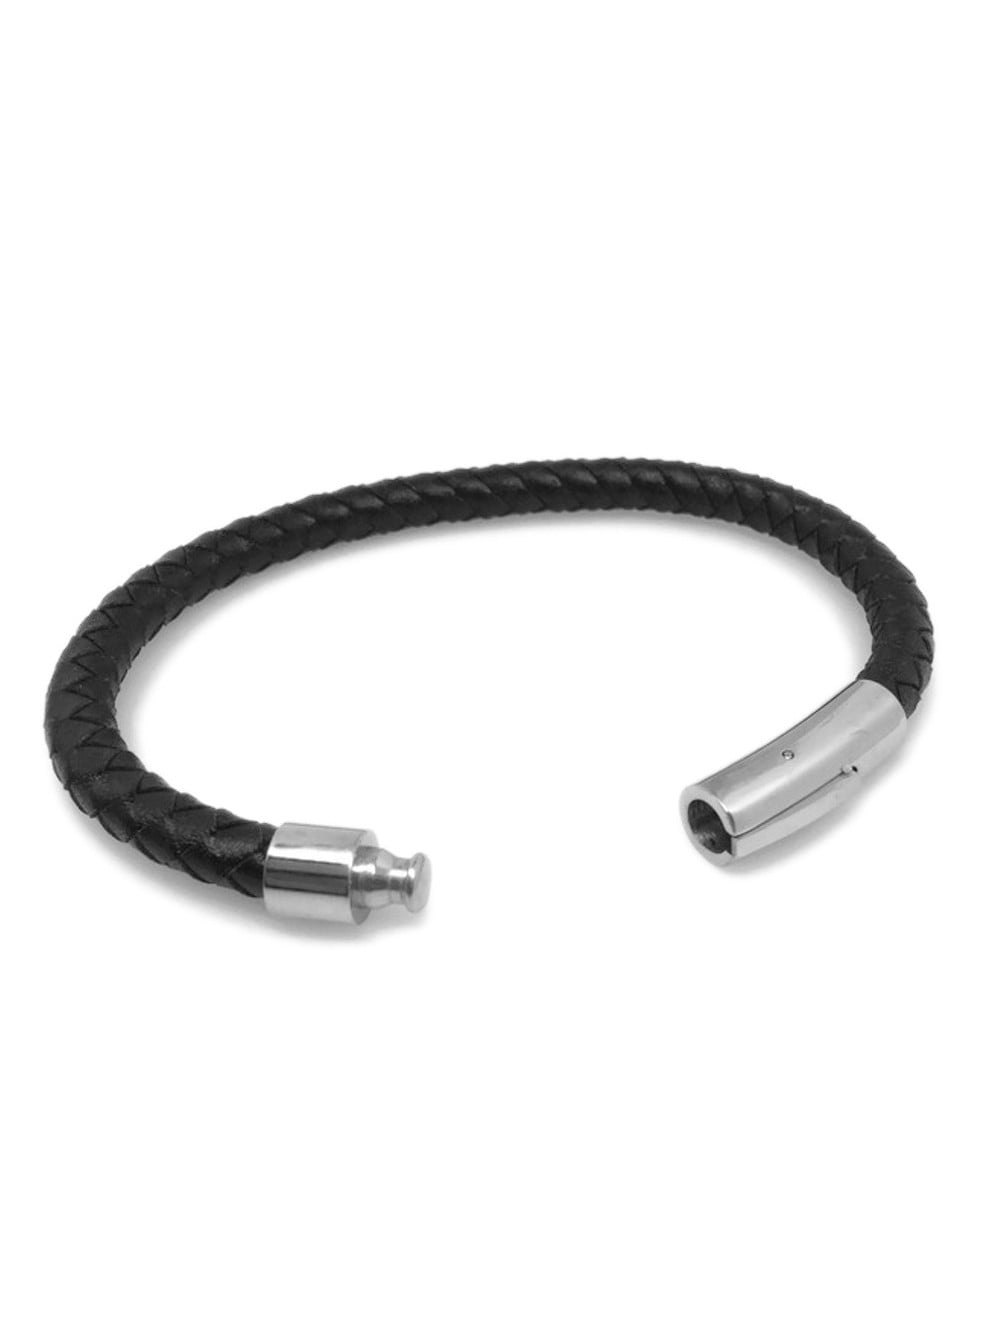  Jstyle Braided Leather Bracelets for Men Bangle Bracelets  Fashion Stainless Steel Clasp 7.5 Inch Black: Clothing, Shoes & Jewelry